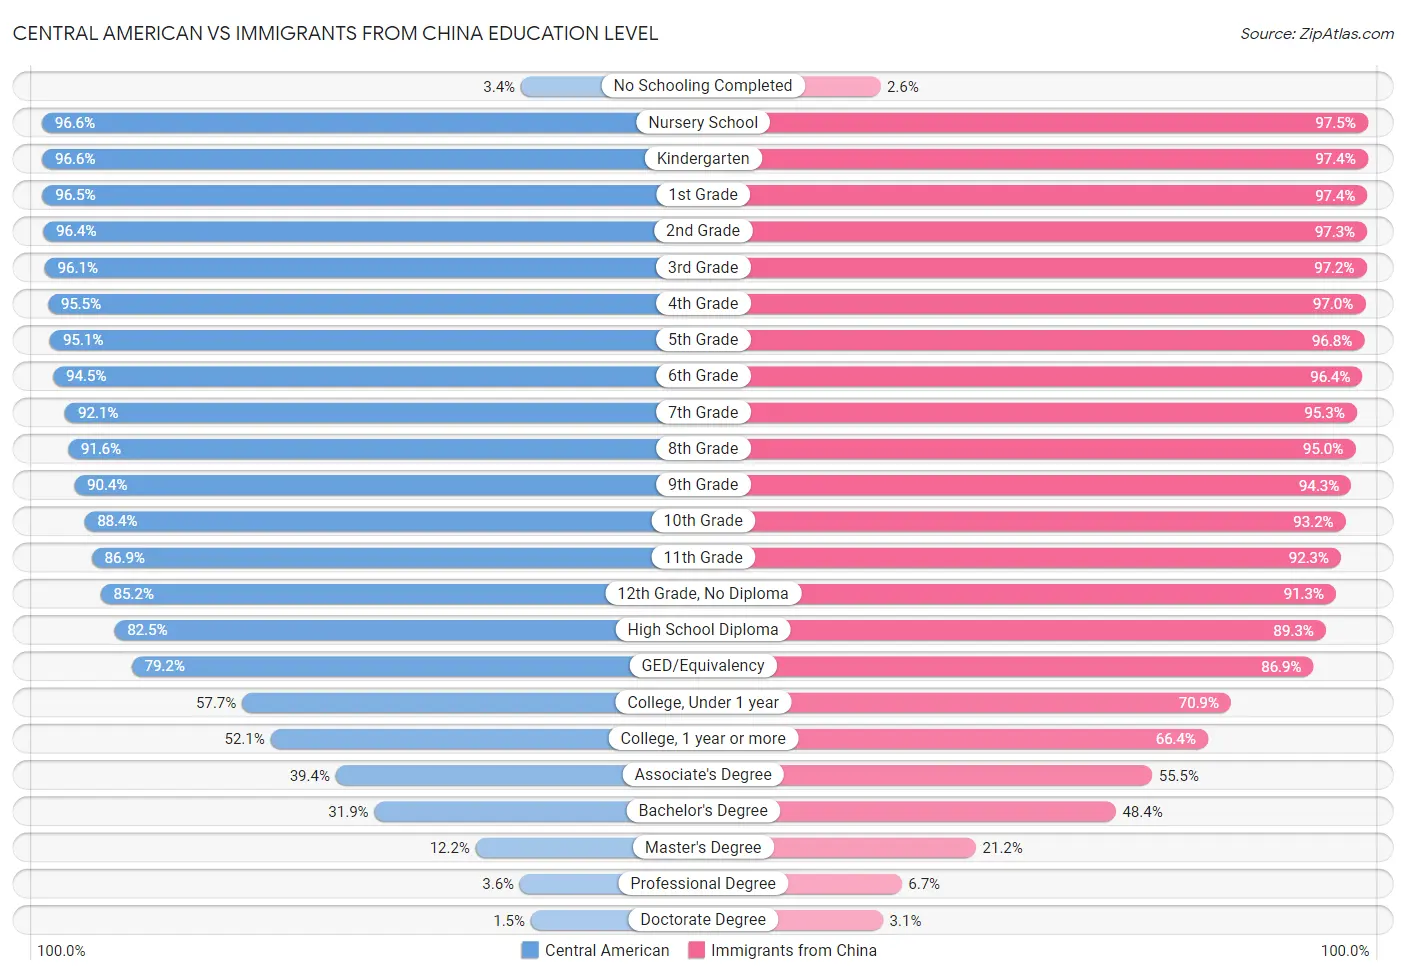 Central American vs Immigrants from China Education Level